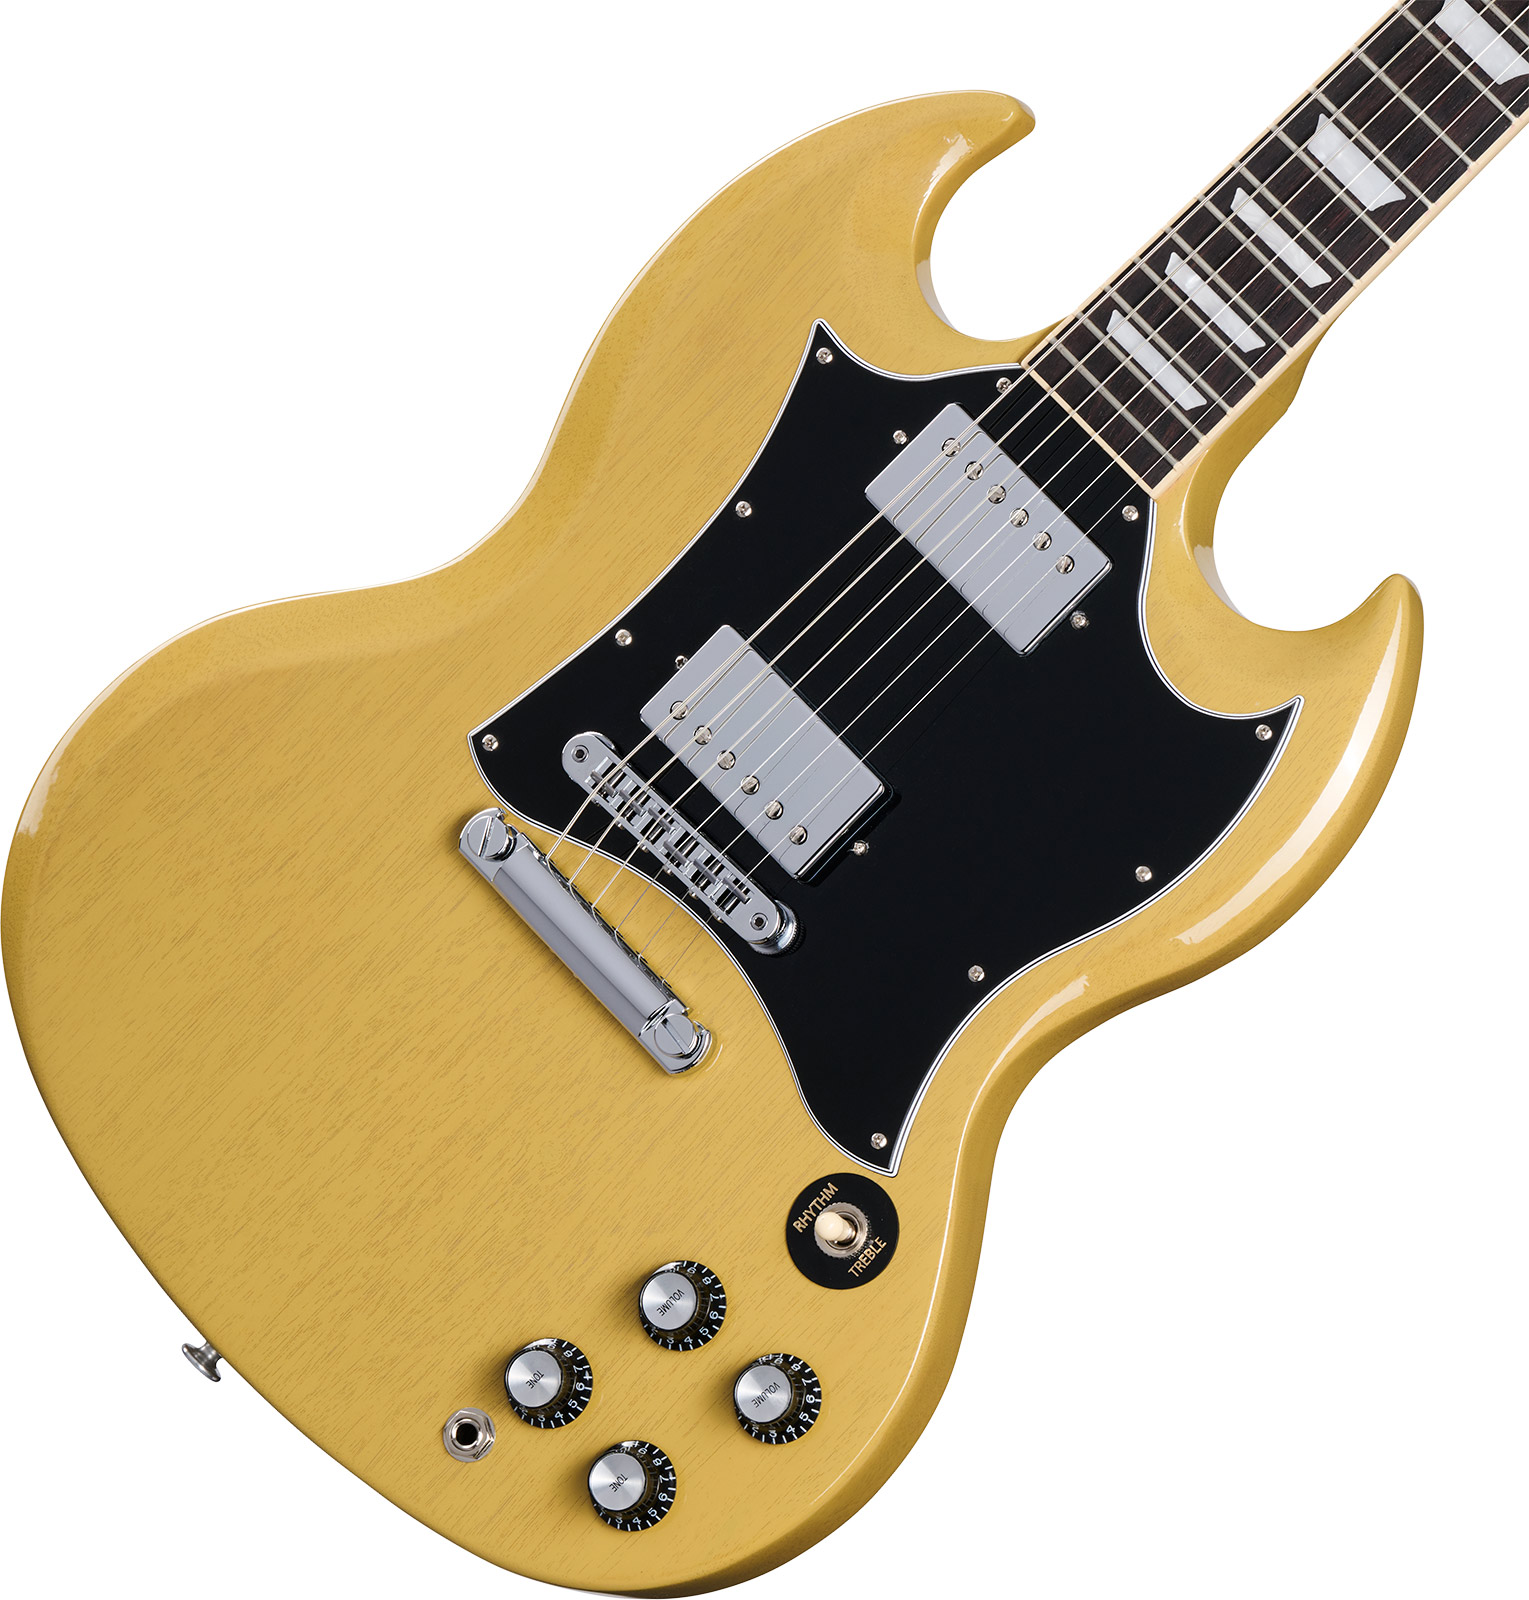 Gibson Sg Standard Custom Color 2h Ht Rw - Tv Yellow - Double cut electric guitar - Variation 3